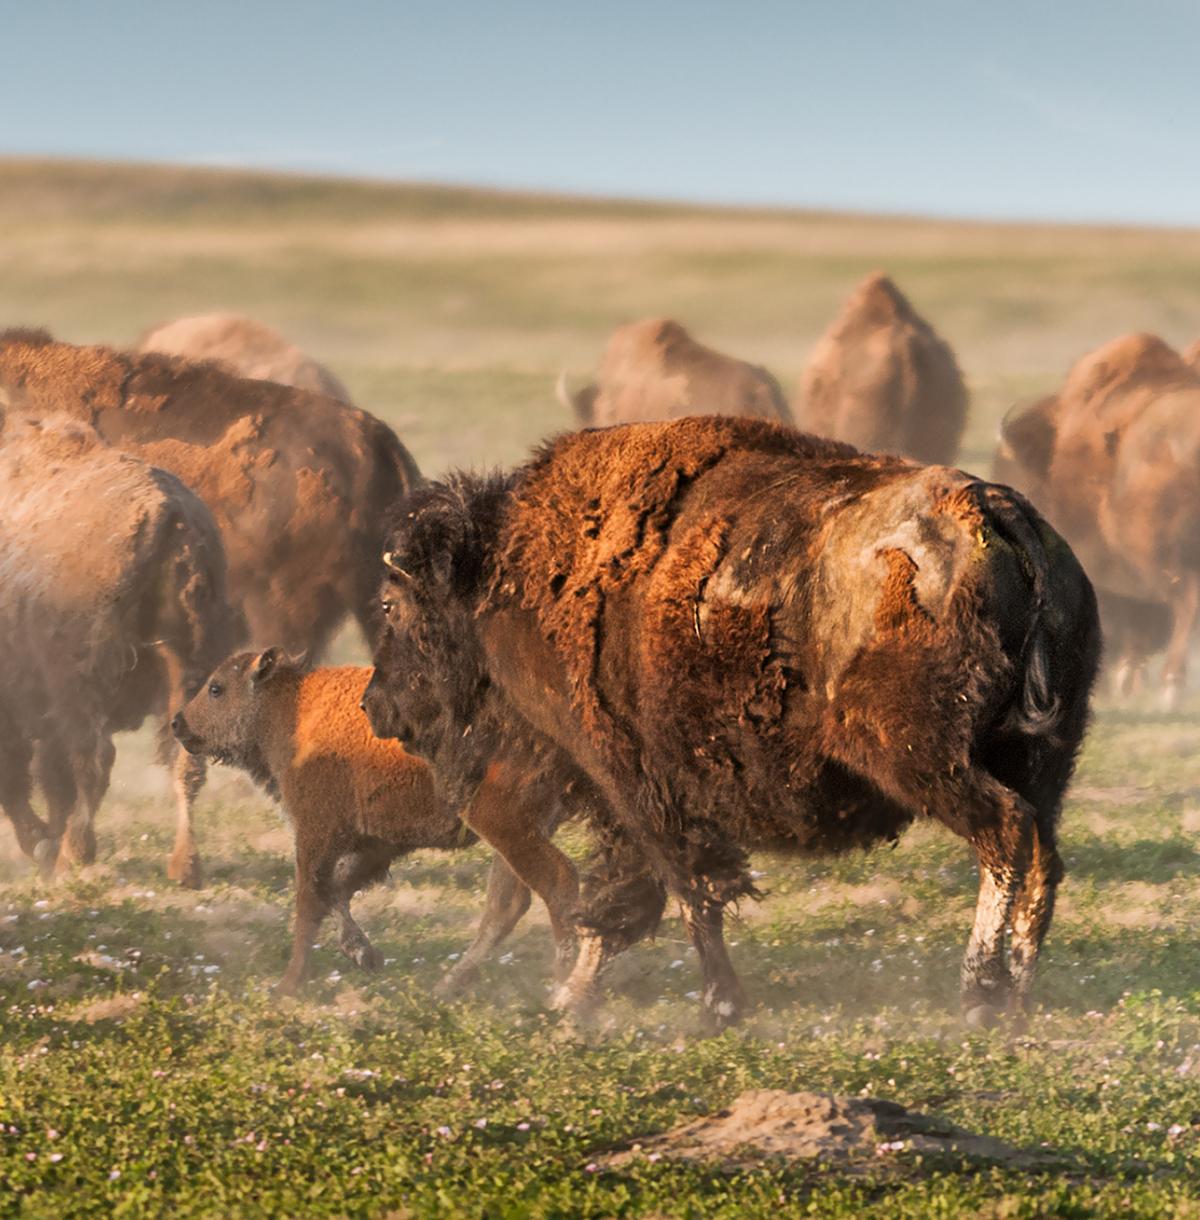 A herd of bison roam together on an empty plain